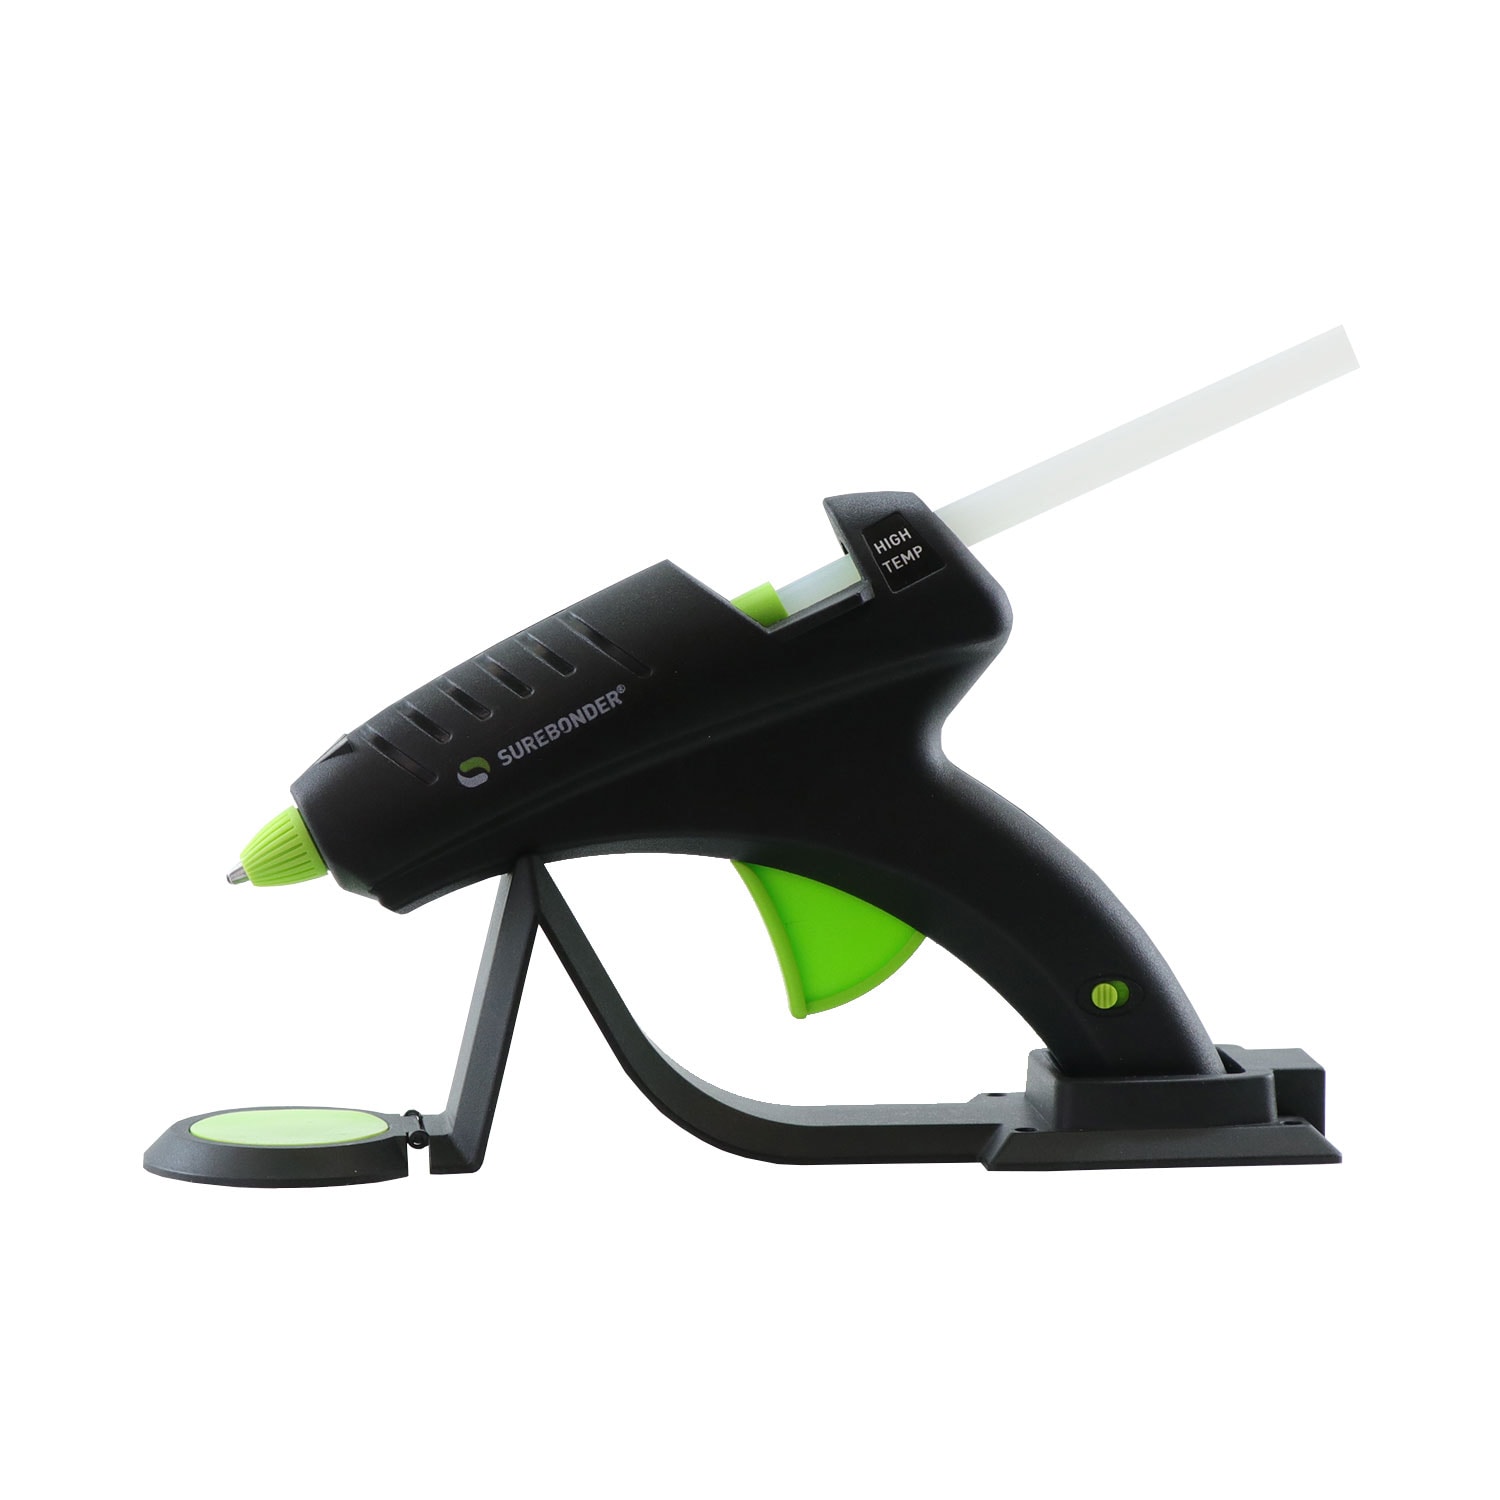 CLEVAST Full Size Hot Glue Gun, with 60/100W Dual Power and 20 Glue St